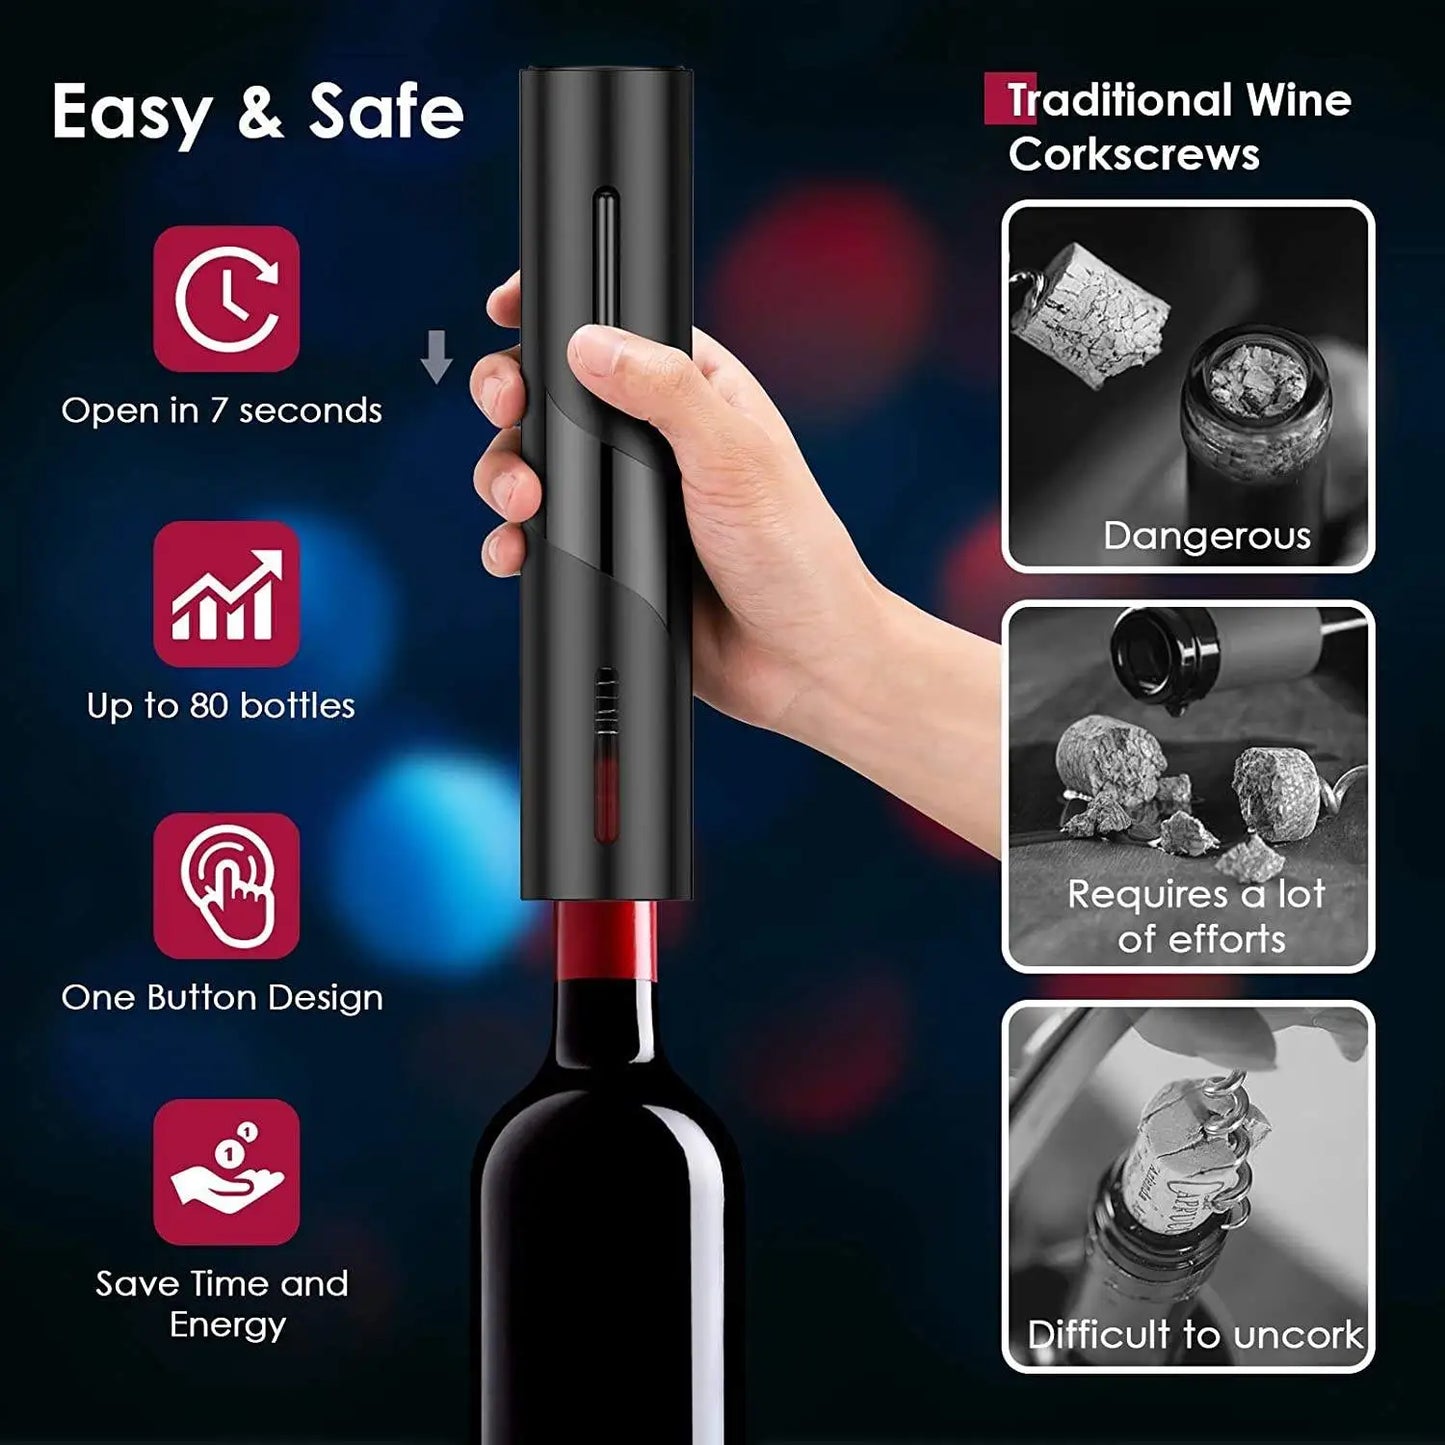 Electric Red Wine Openers Inspire Electric Red Wine Openers Inspire.